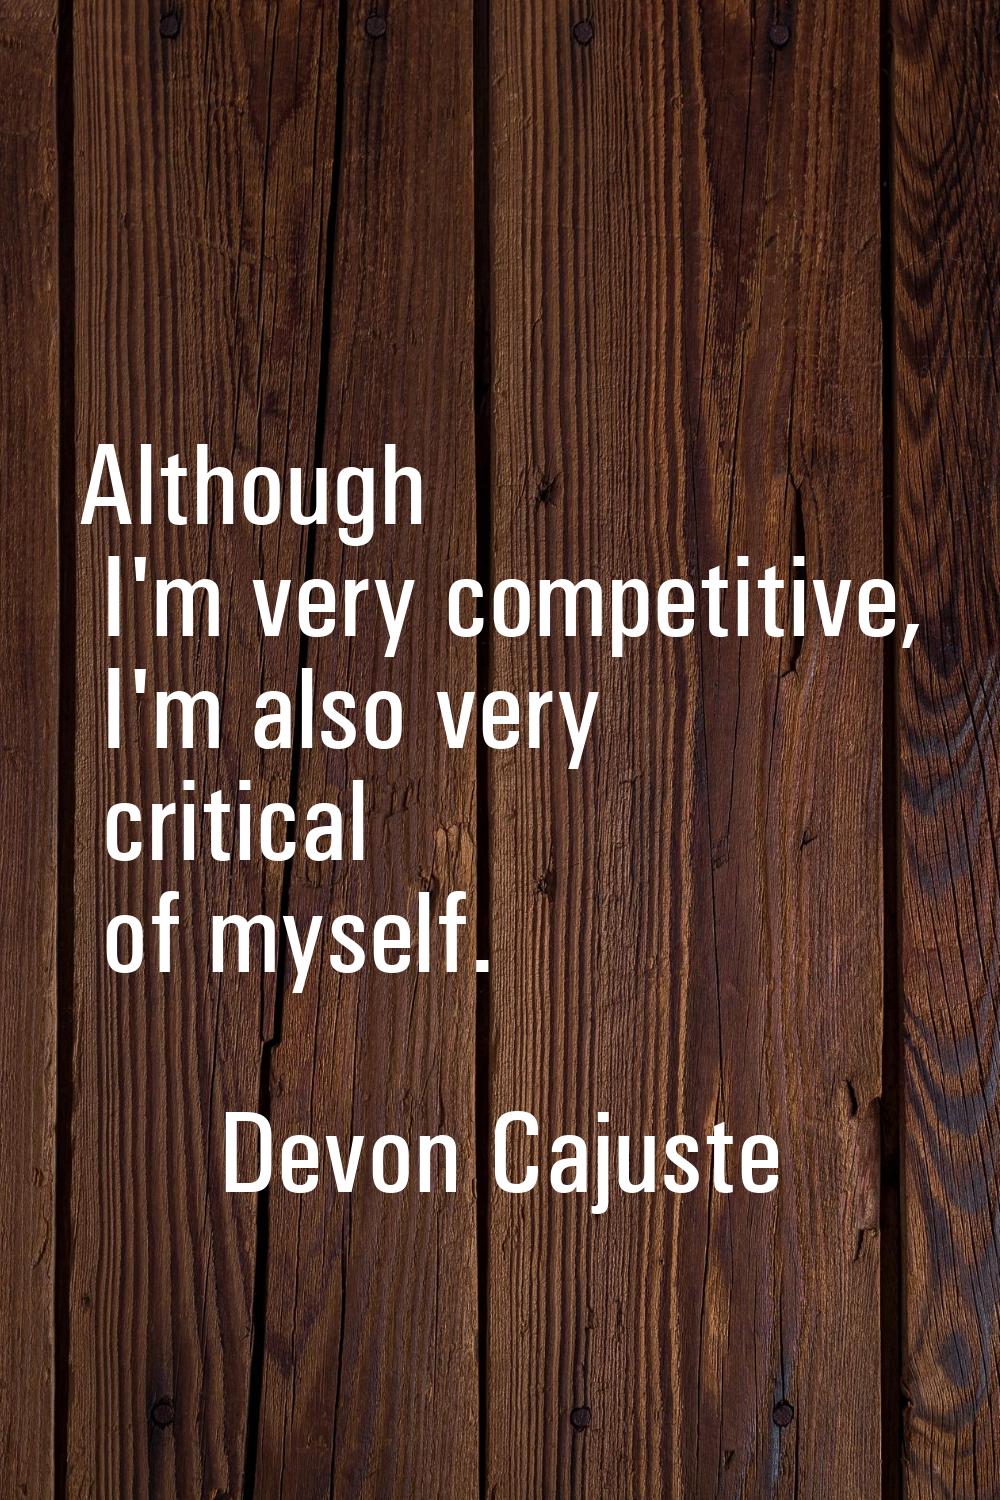 Although I'm very competitive, I'm also very critical of myself.